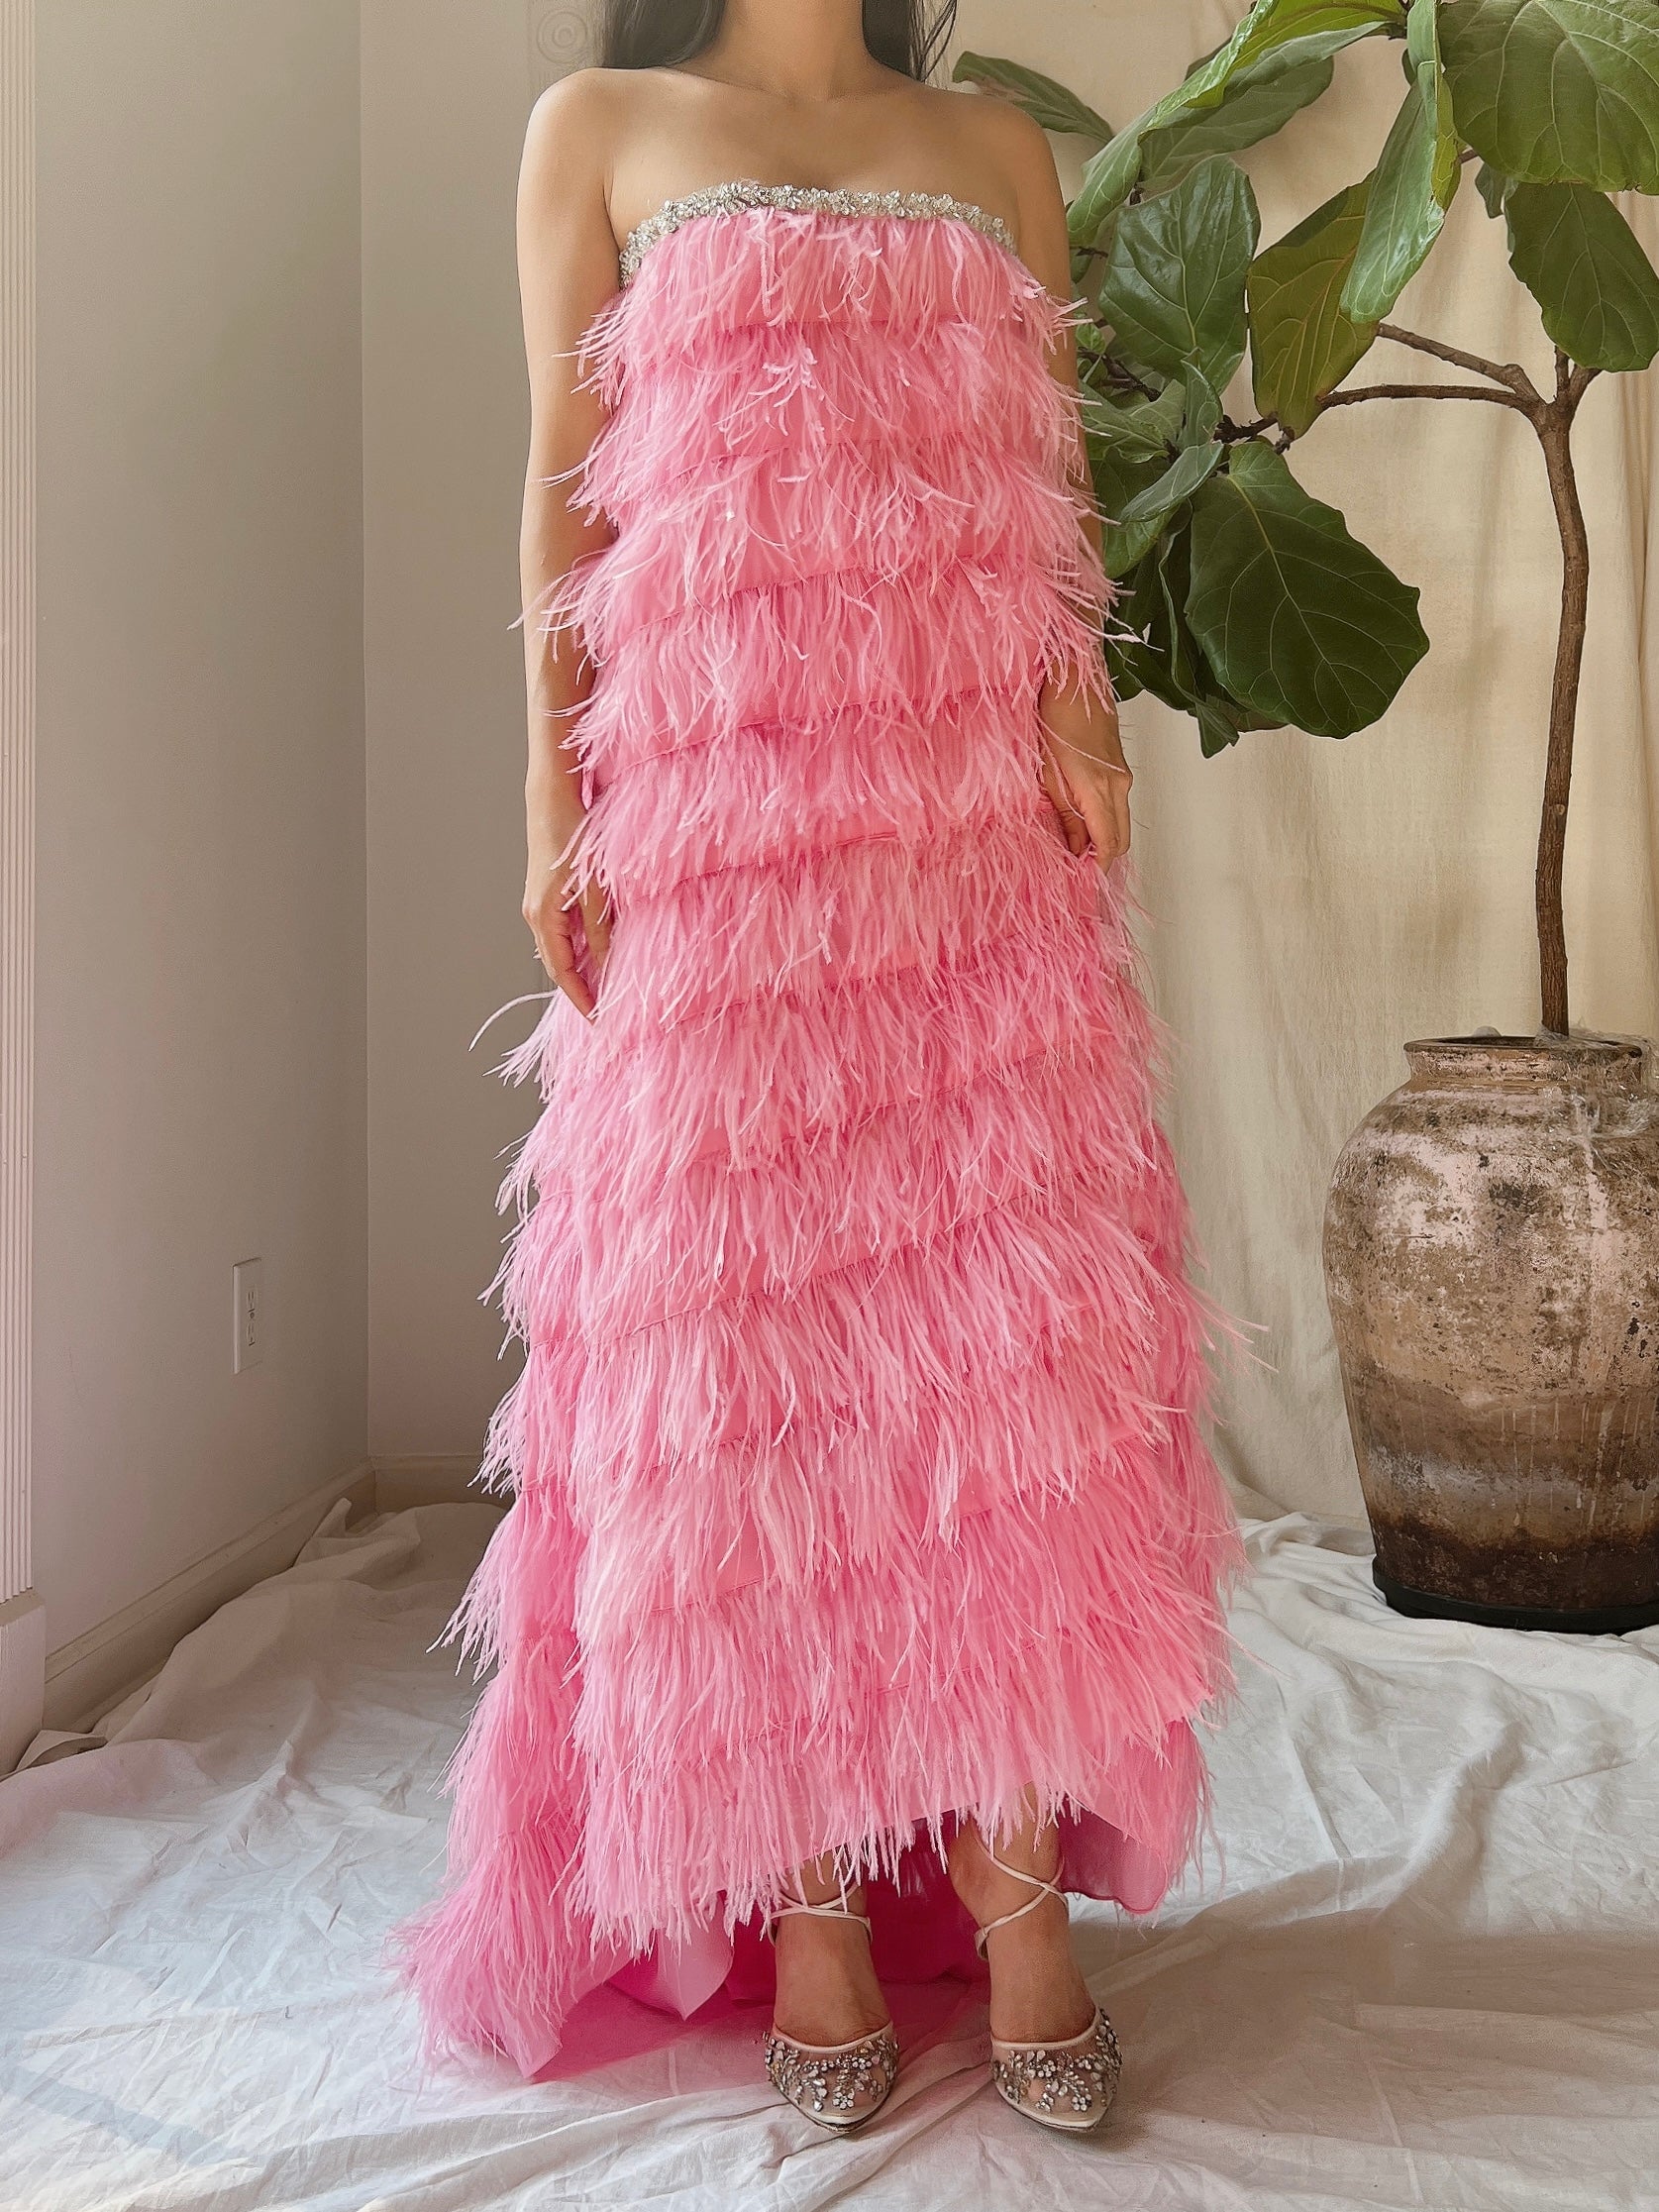 Pink Feather Tiered Dress - S-L